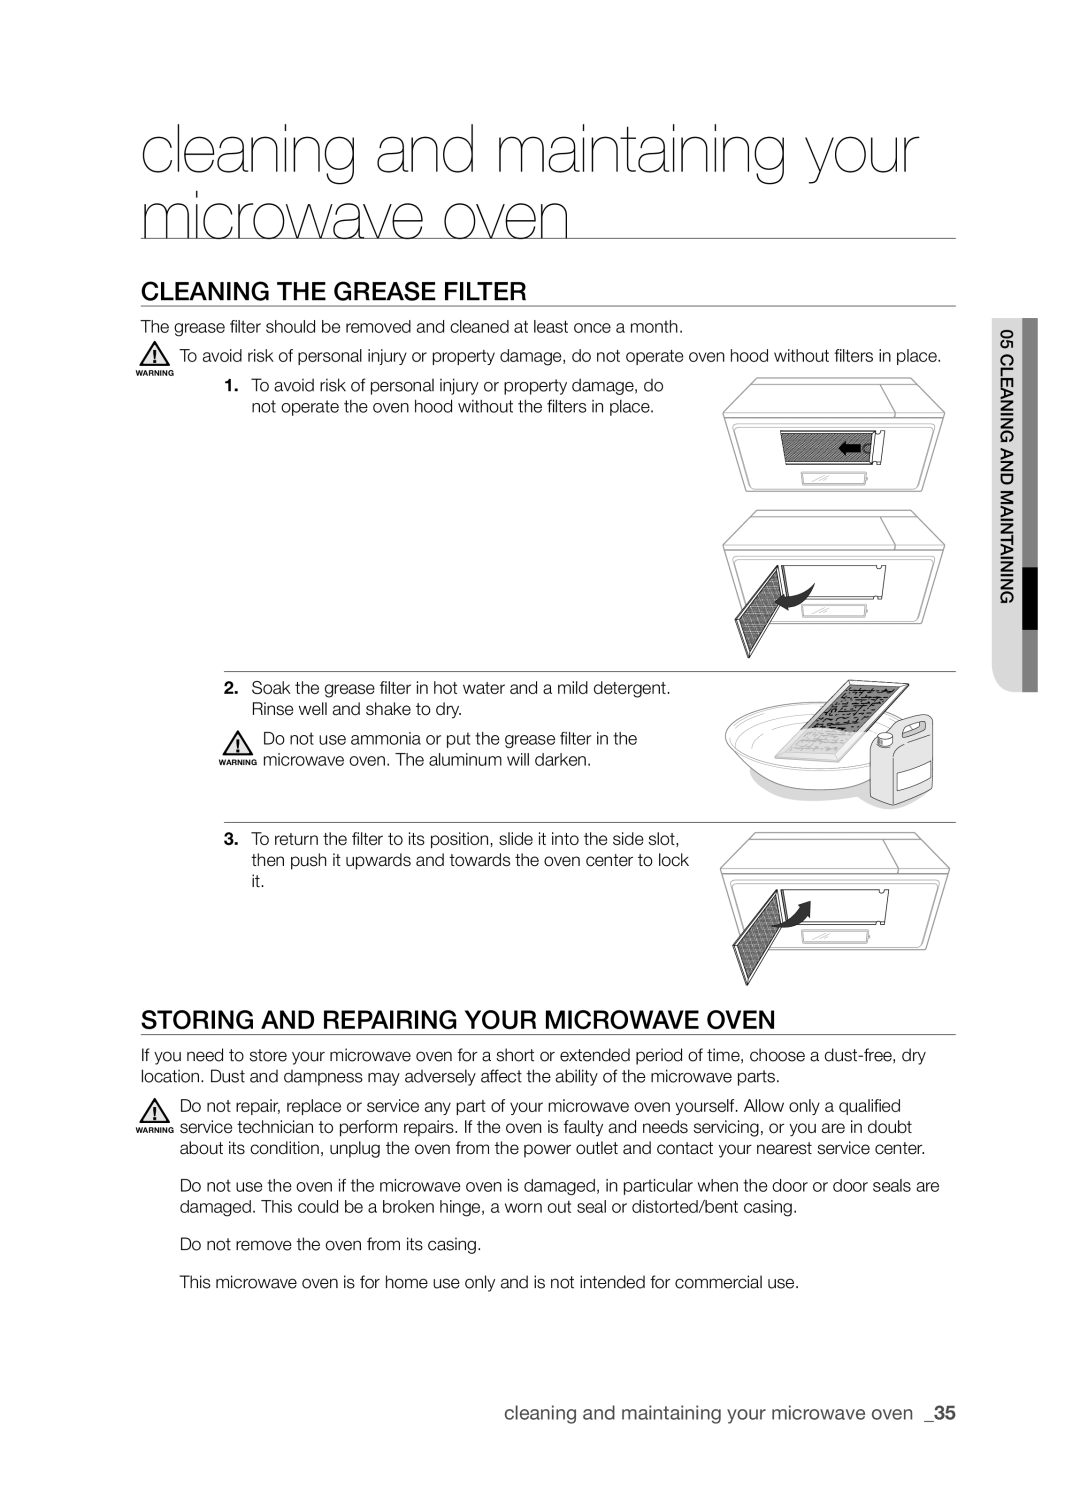 Samsung SMH8165STE user manual Cleaning the grease filter, Storing and repairing your microwave oven 